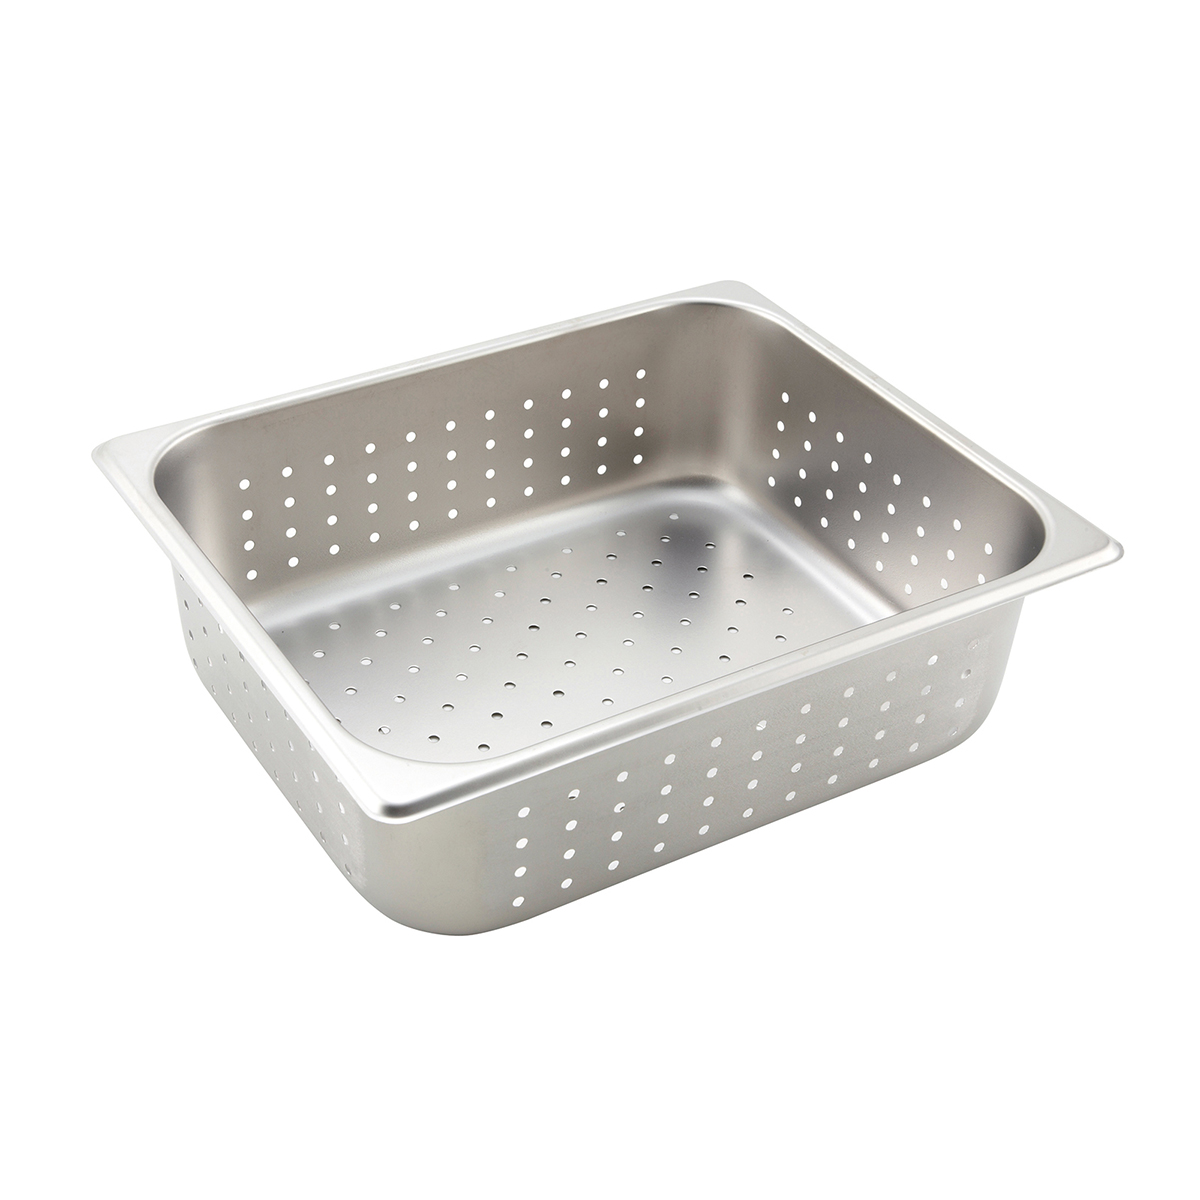 Perforated Steam Pan, Half Size (10-3/8" x 12-3/4") x 4"